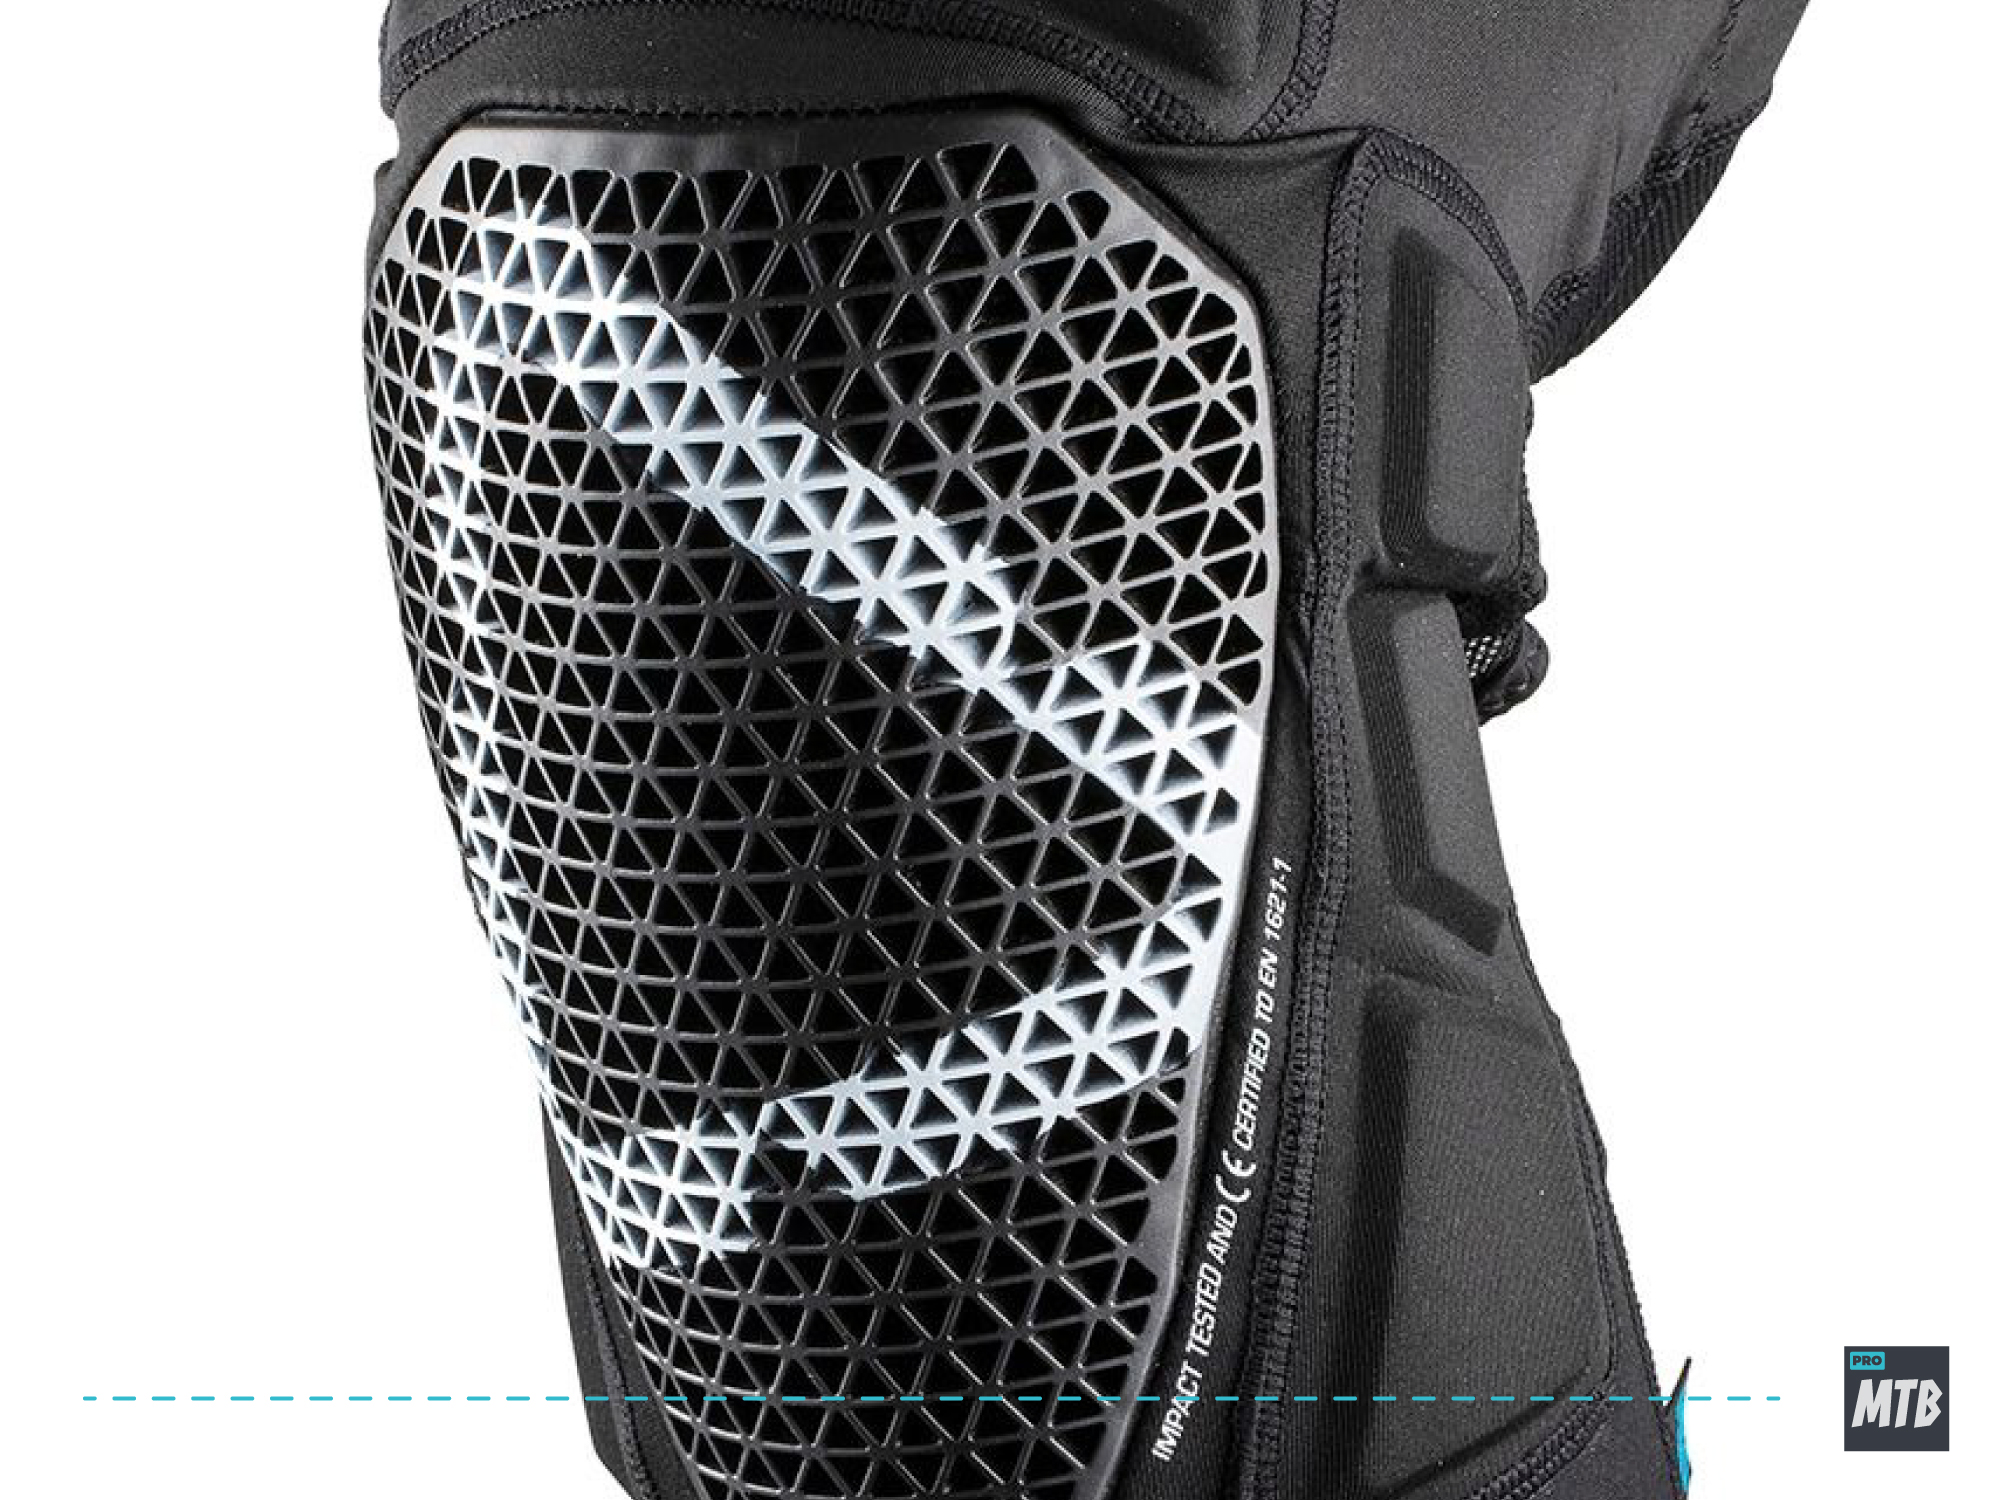 A person wearing mountain bike knee pads with hook and loop straps